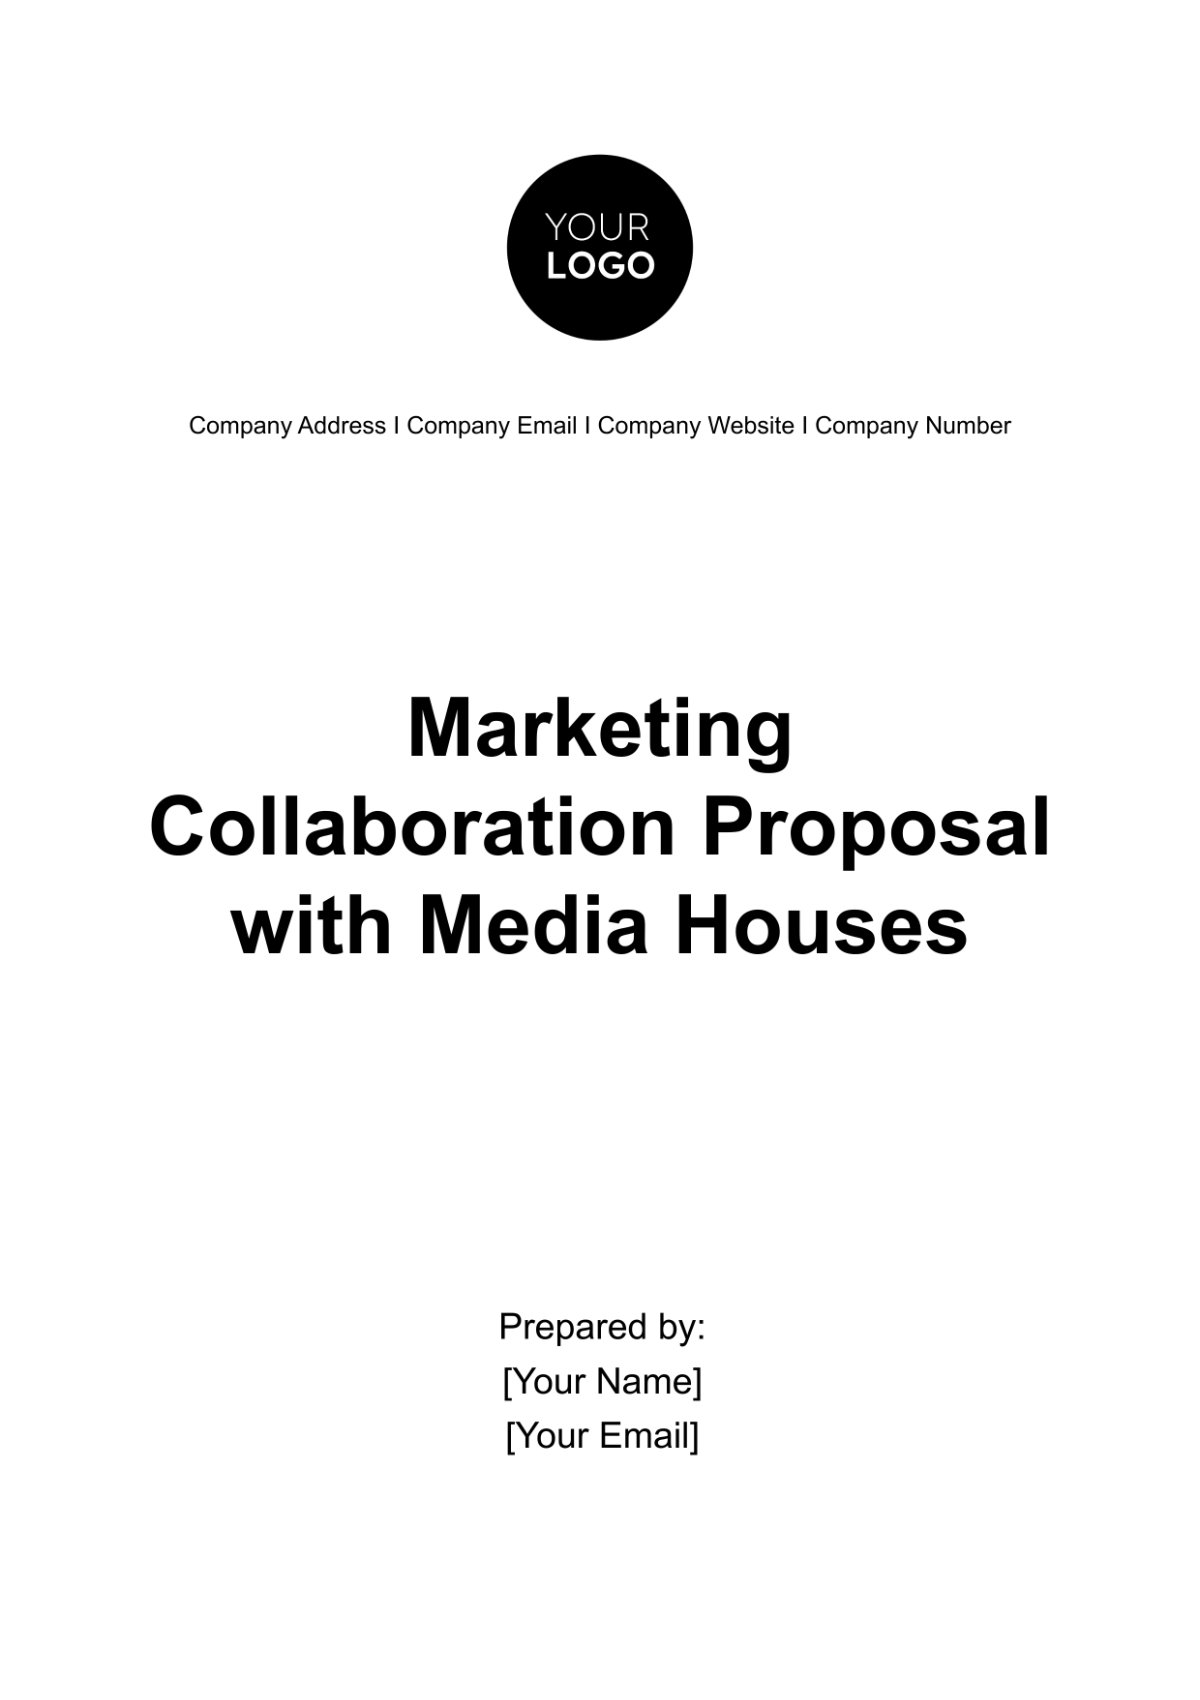 Free Marketing Collaboration Proposal with Media Houses Template